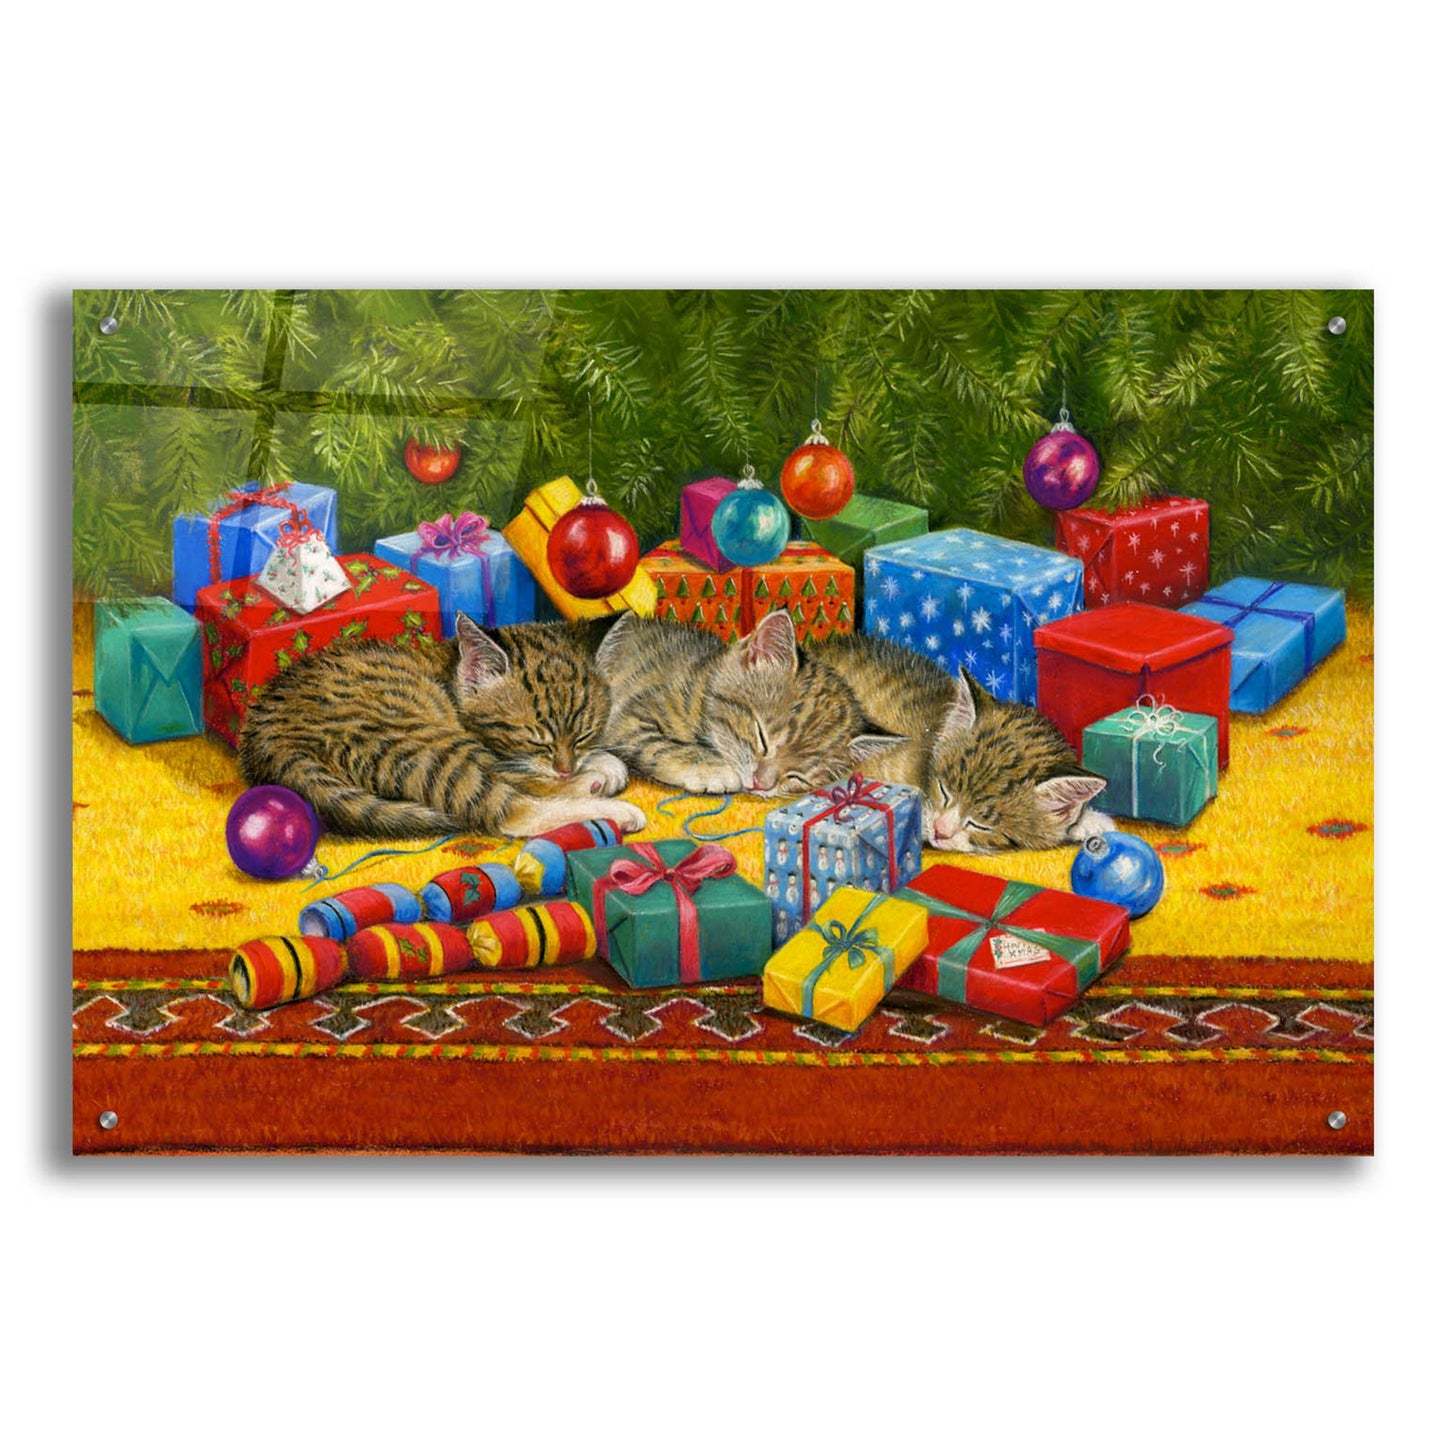 Epic Art 'Under The Christmas Tree' by Janet Pidoux, Acrylic Glass Wall Art,36x24